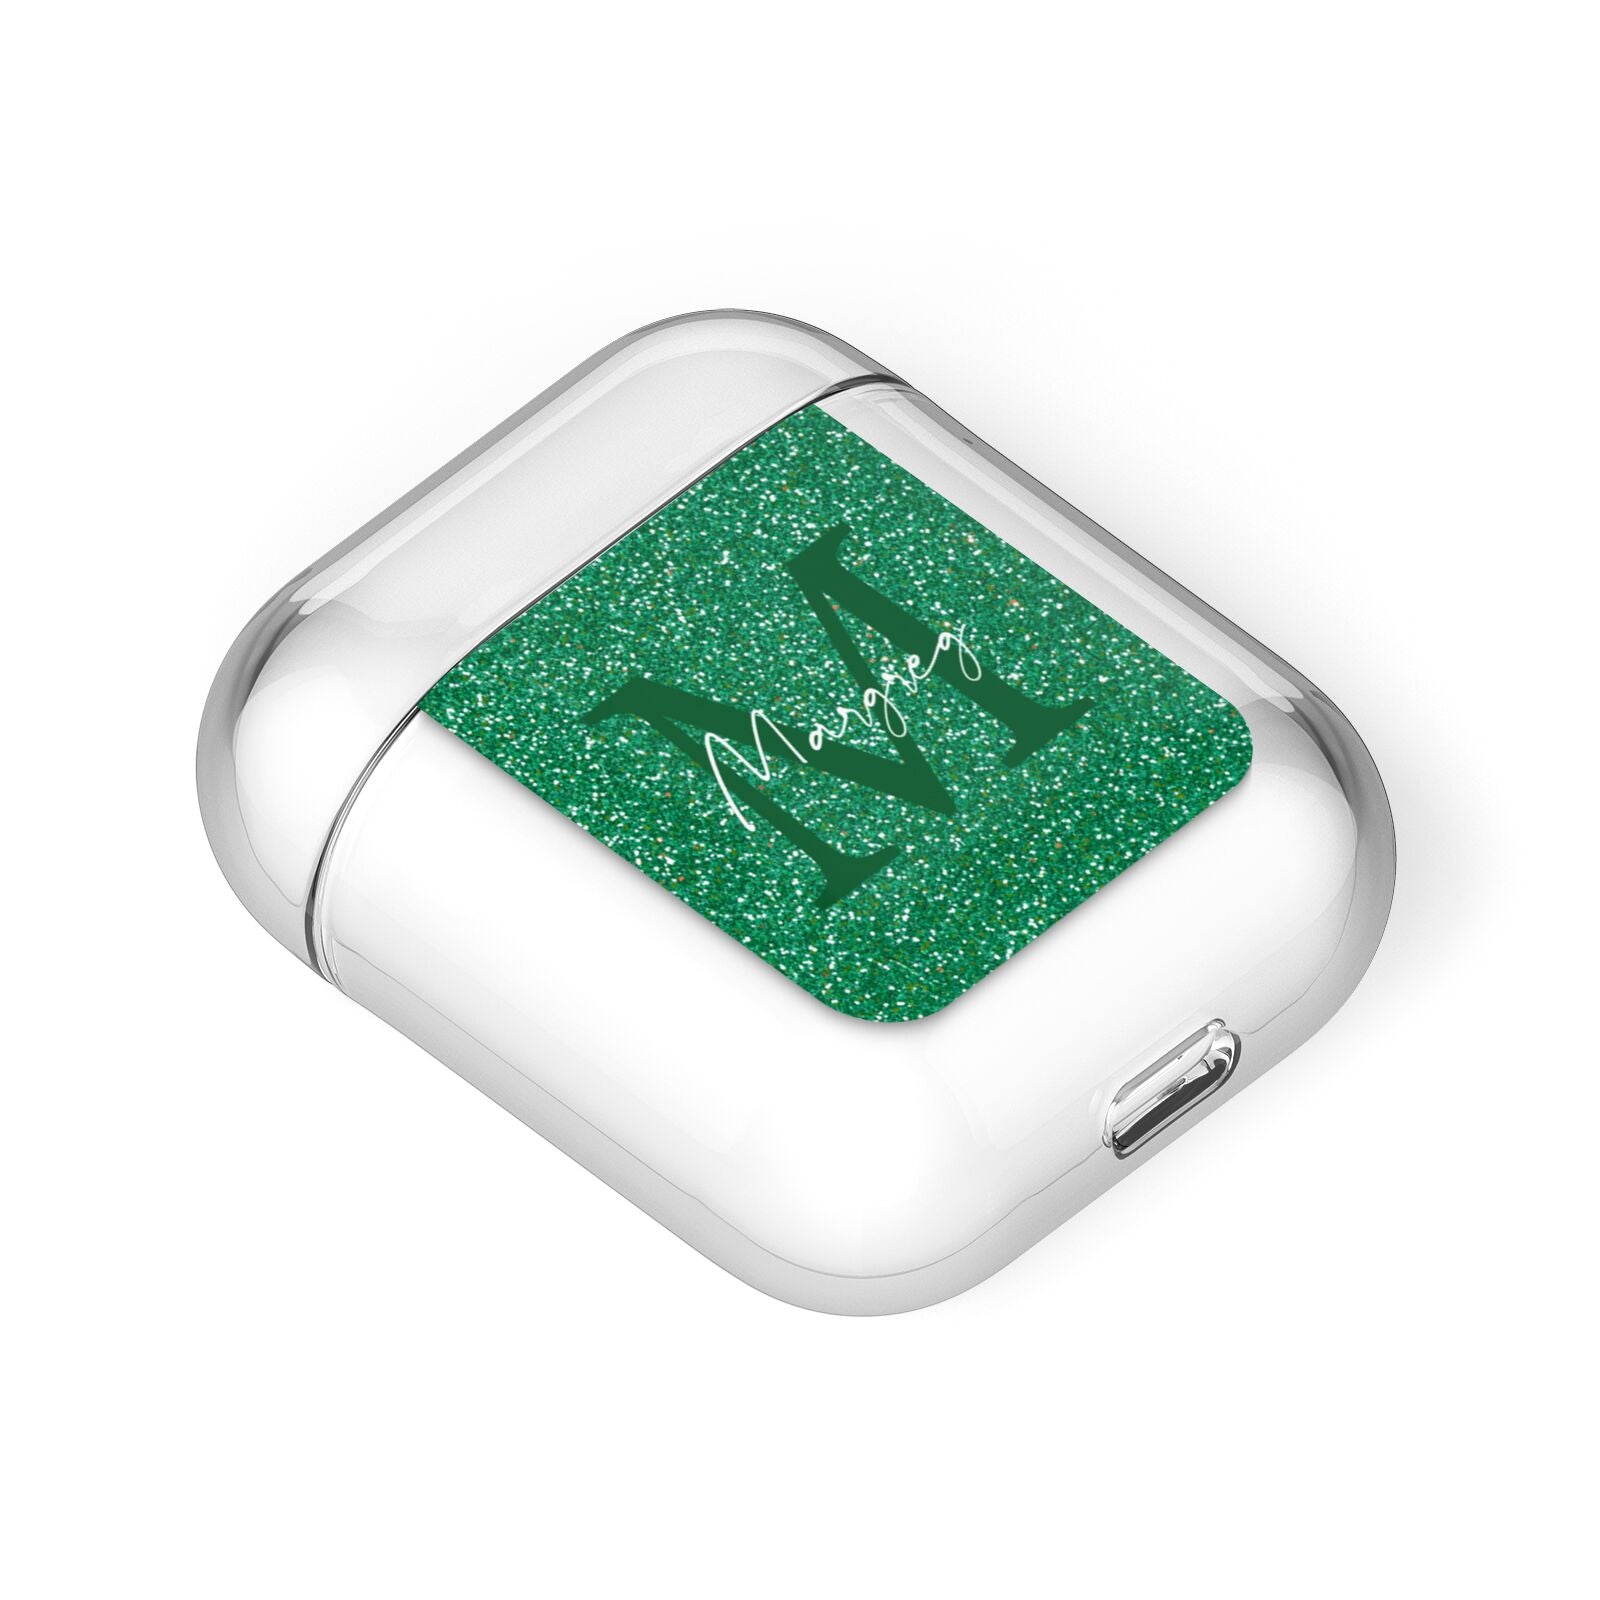 Green Monogram AirPods Case Laid Flat